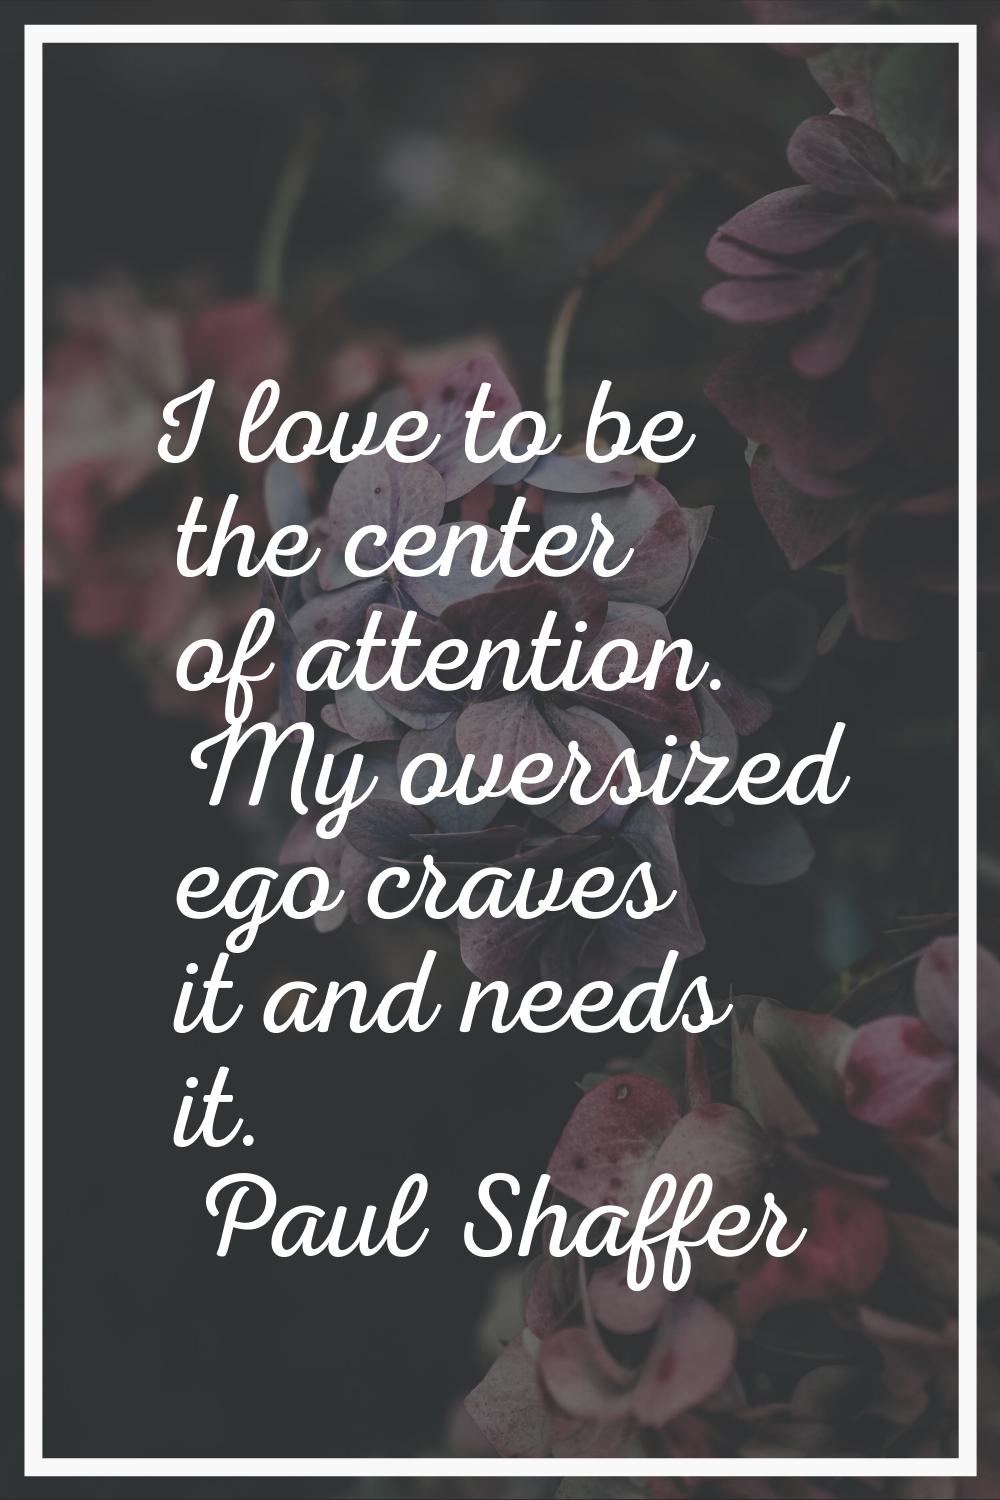 I love to be the center of attention. My oversized ego craves it and needs it.